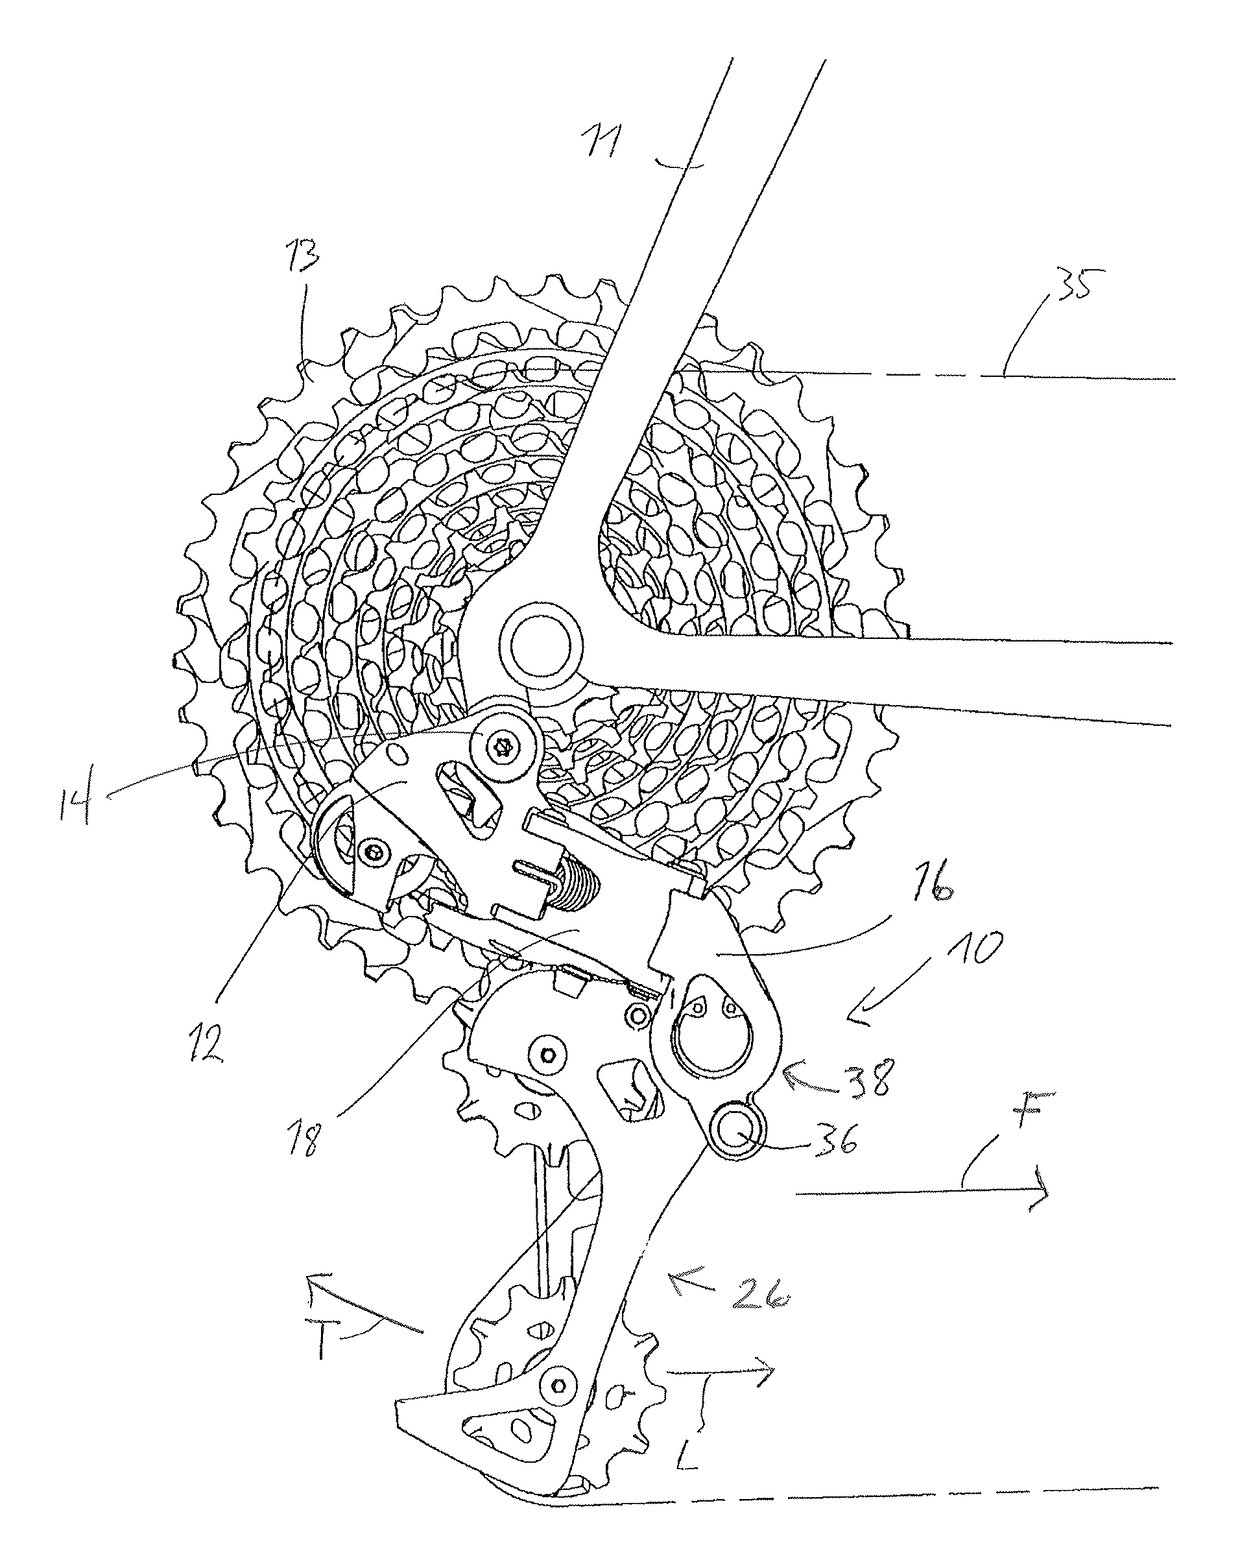 Bicycle rear derailleur with a damper assembly